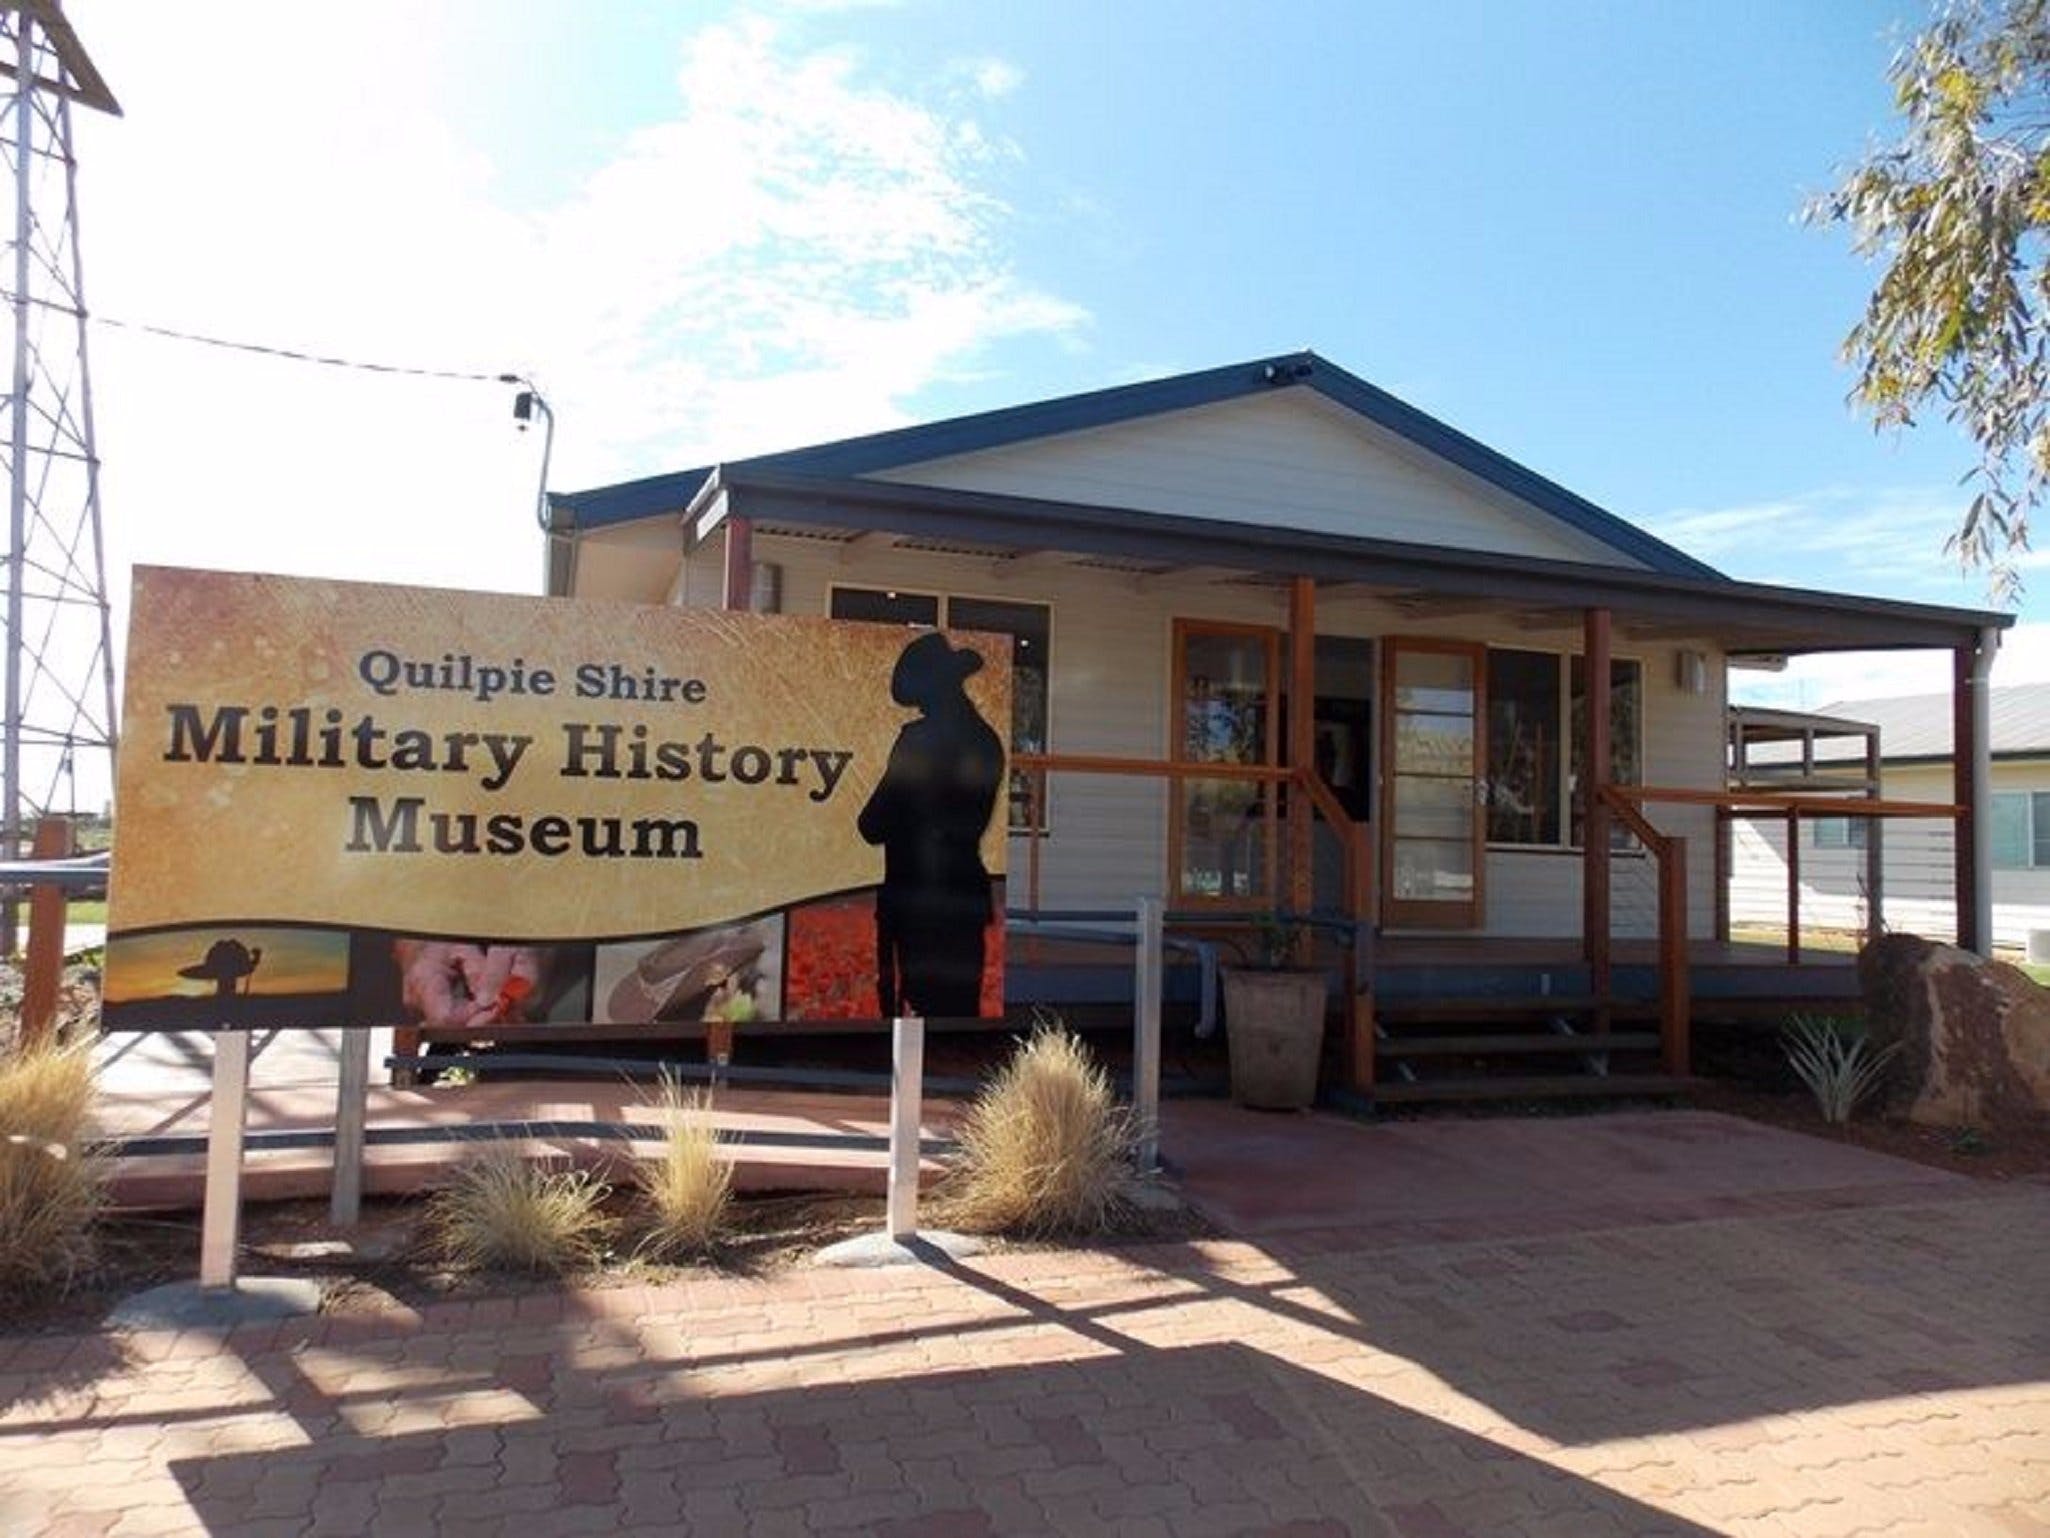 Quilpie Shire Military History Museum - Surfers Gold Coast